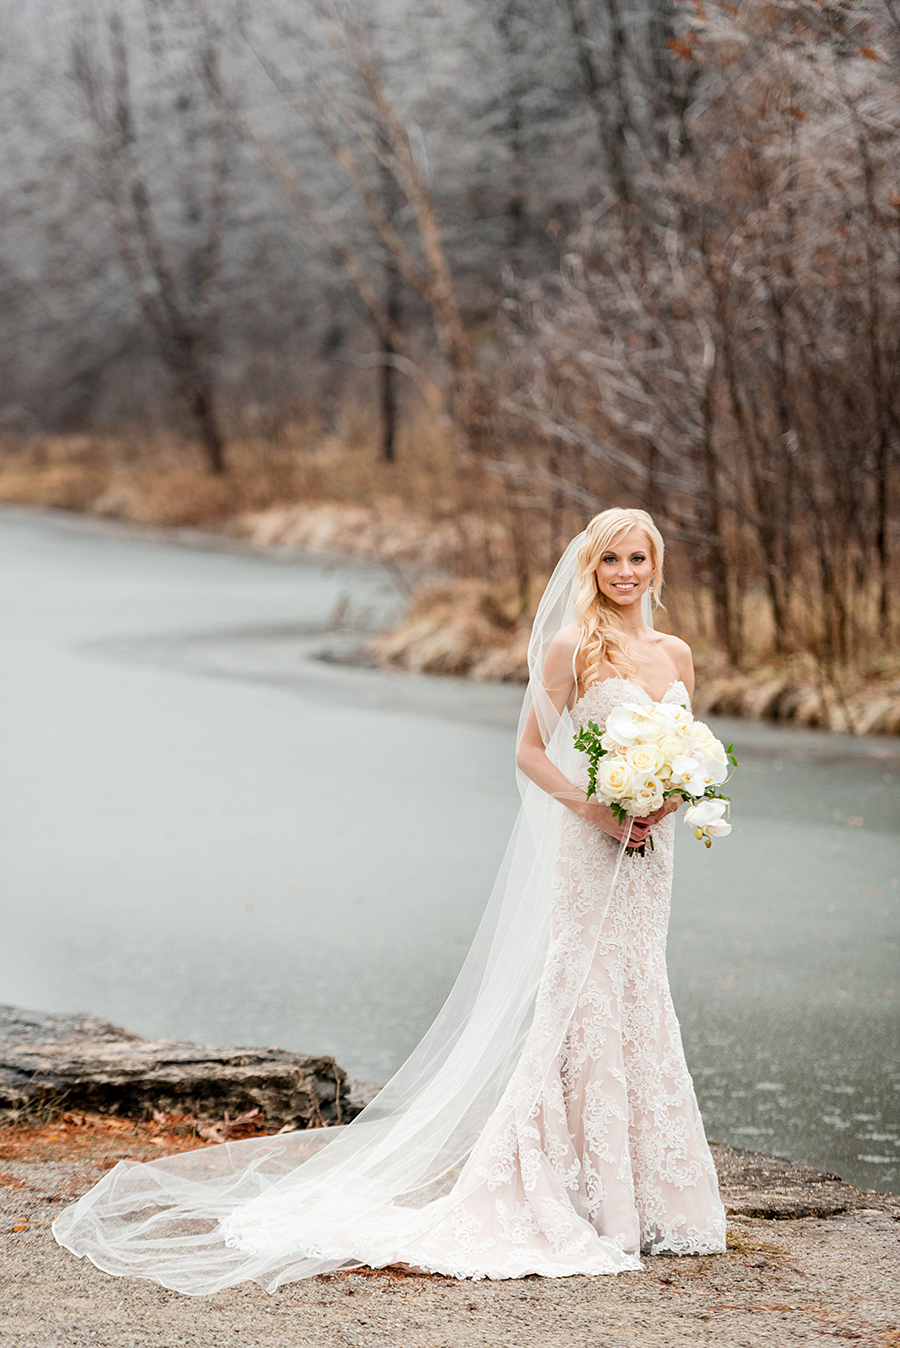 bridal portrait near frozen river for a winter wedding at graham chapel by ashley fisher photography